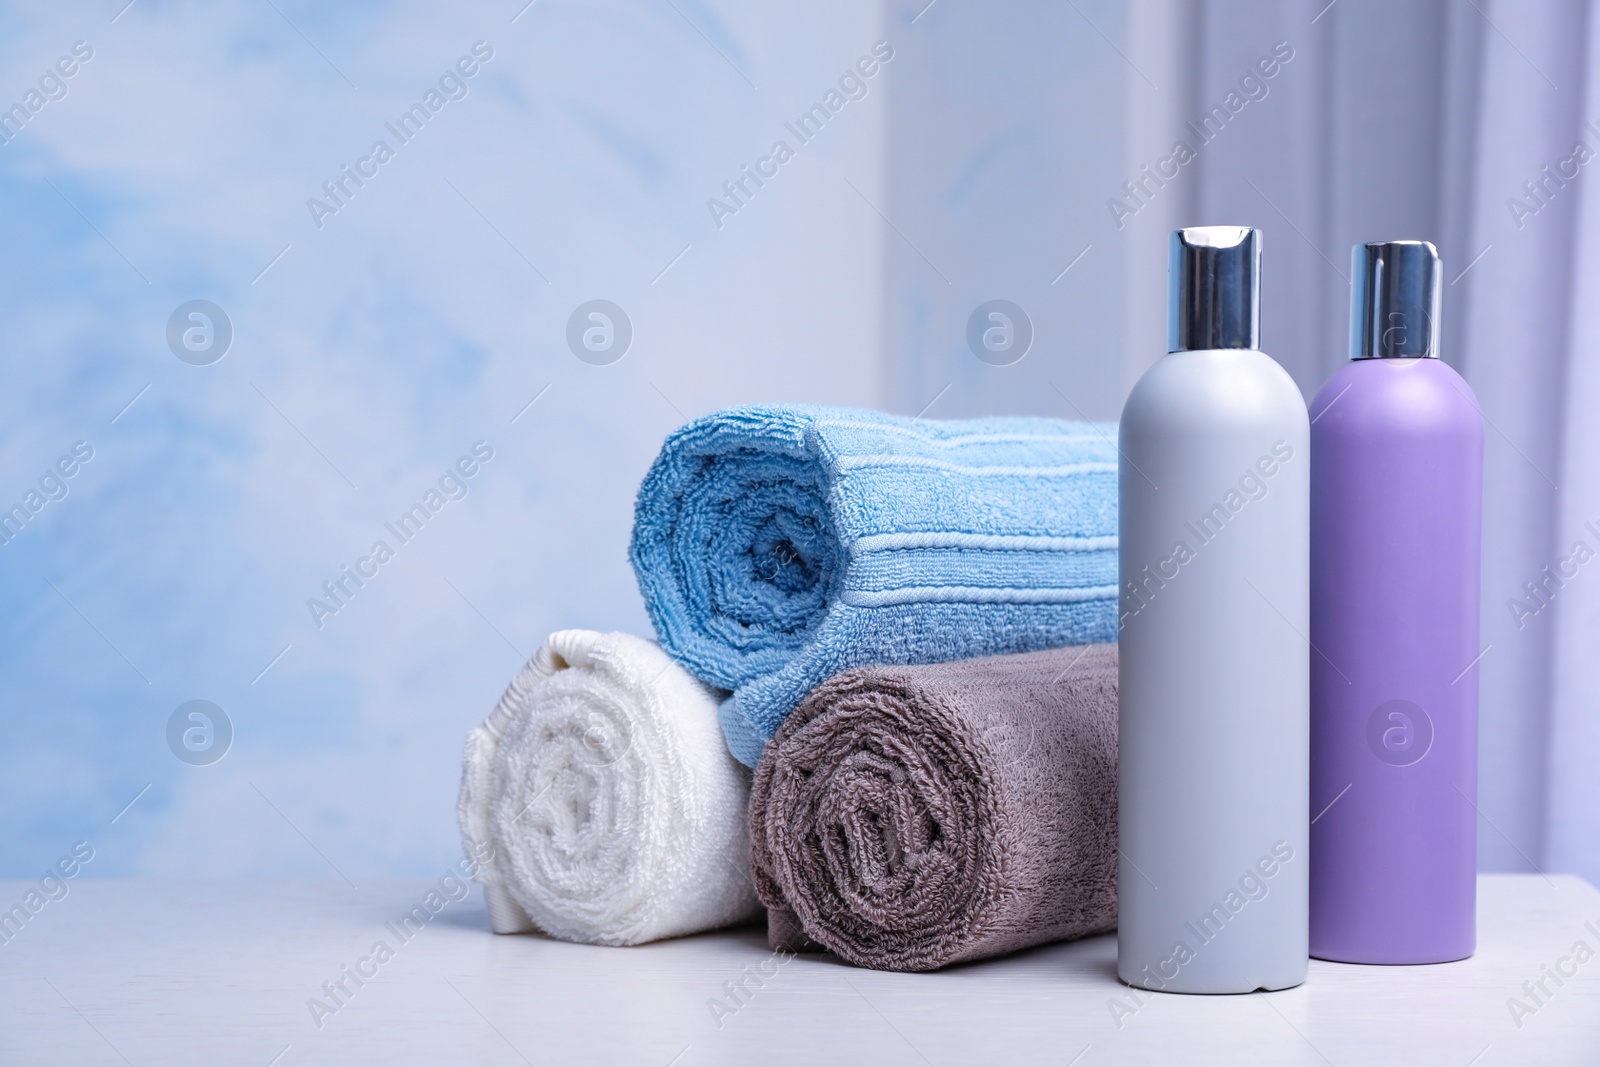 Photo of Bottles of shampoo and rolled bath towels on table, space for text